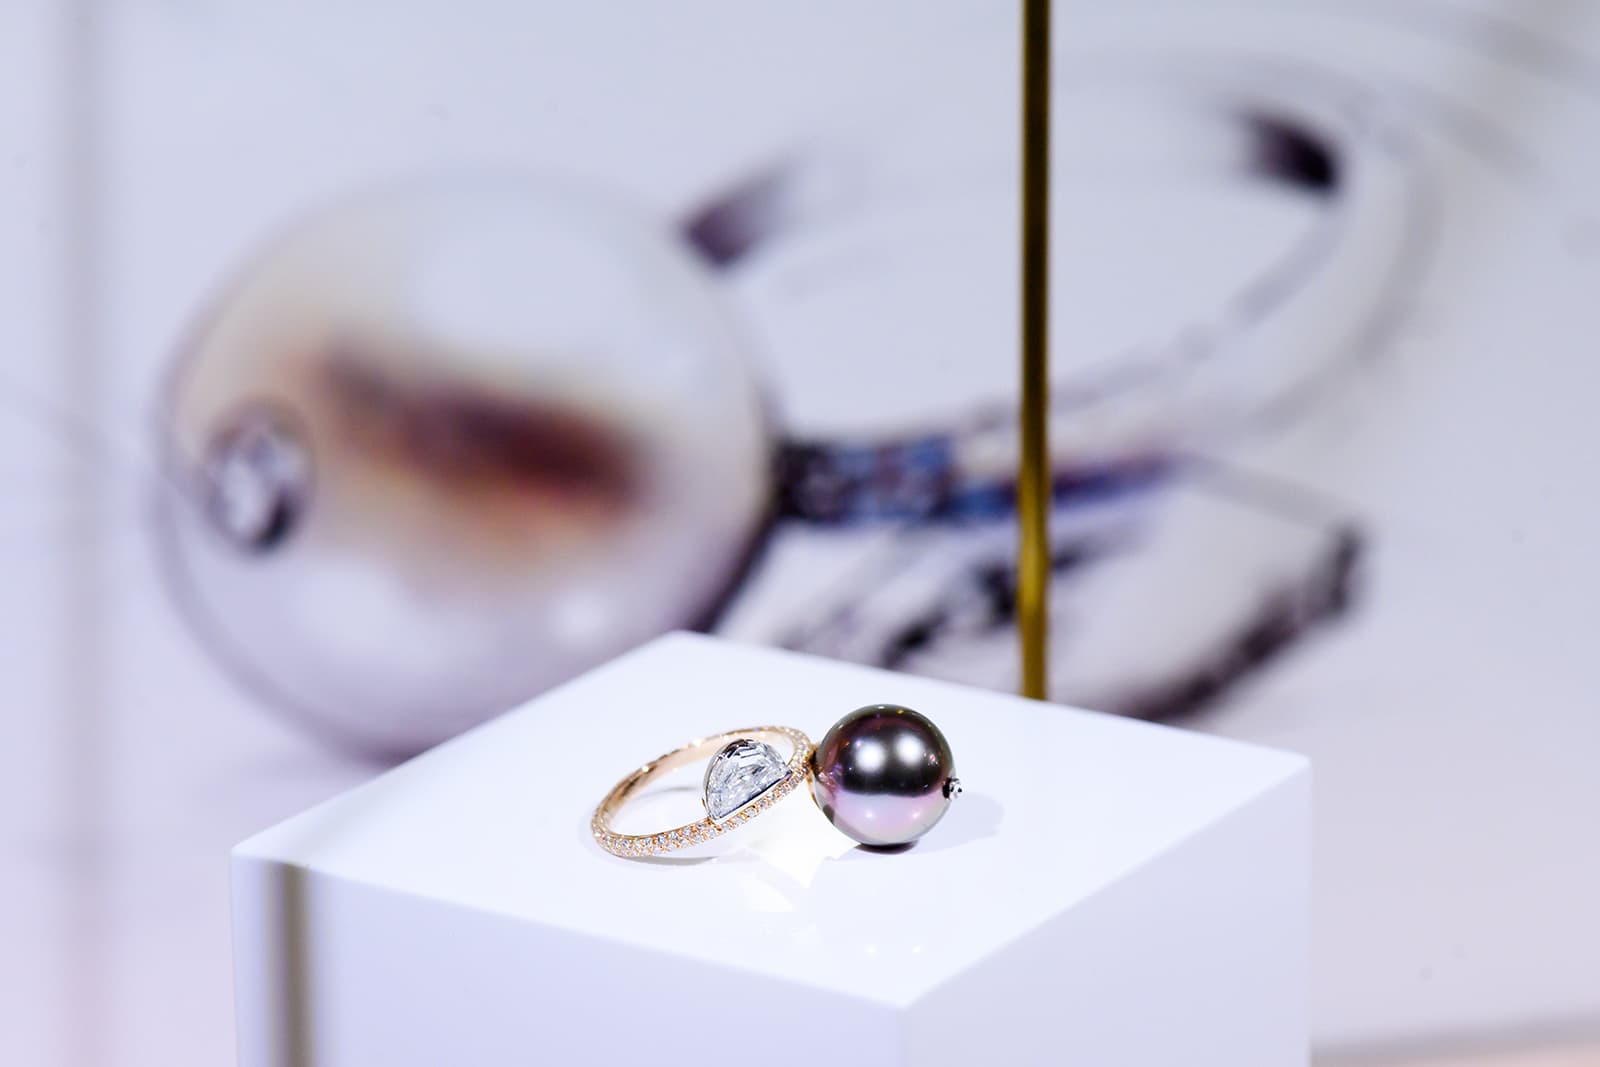 Nuun 'Perle Noir' ring from the 'Manifesto' collection with 13.90ct black pearl and diamond in rose gold